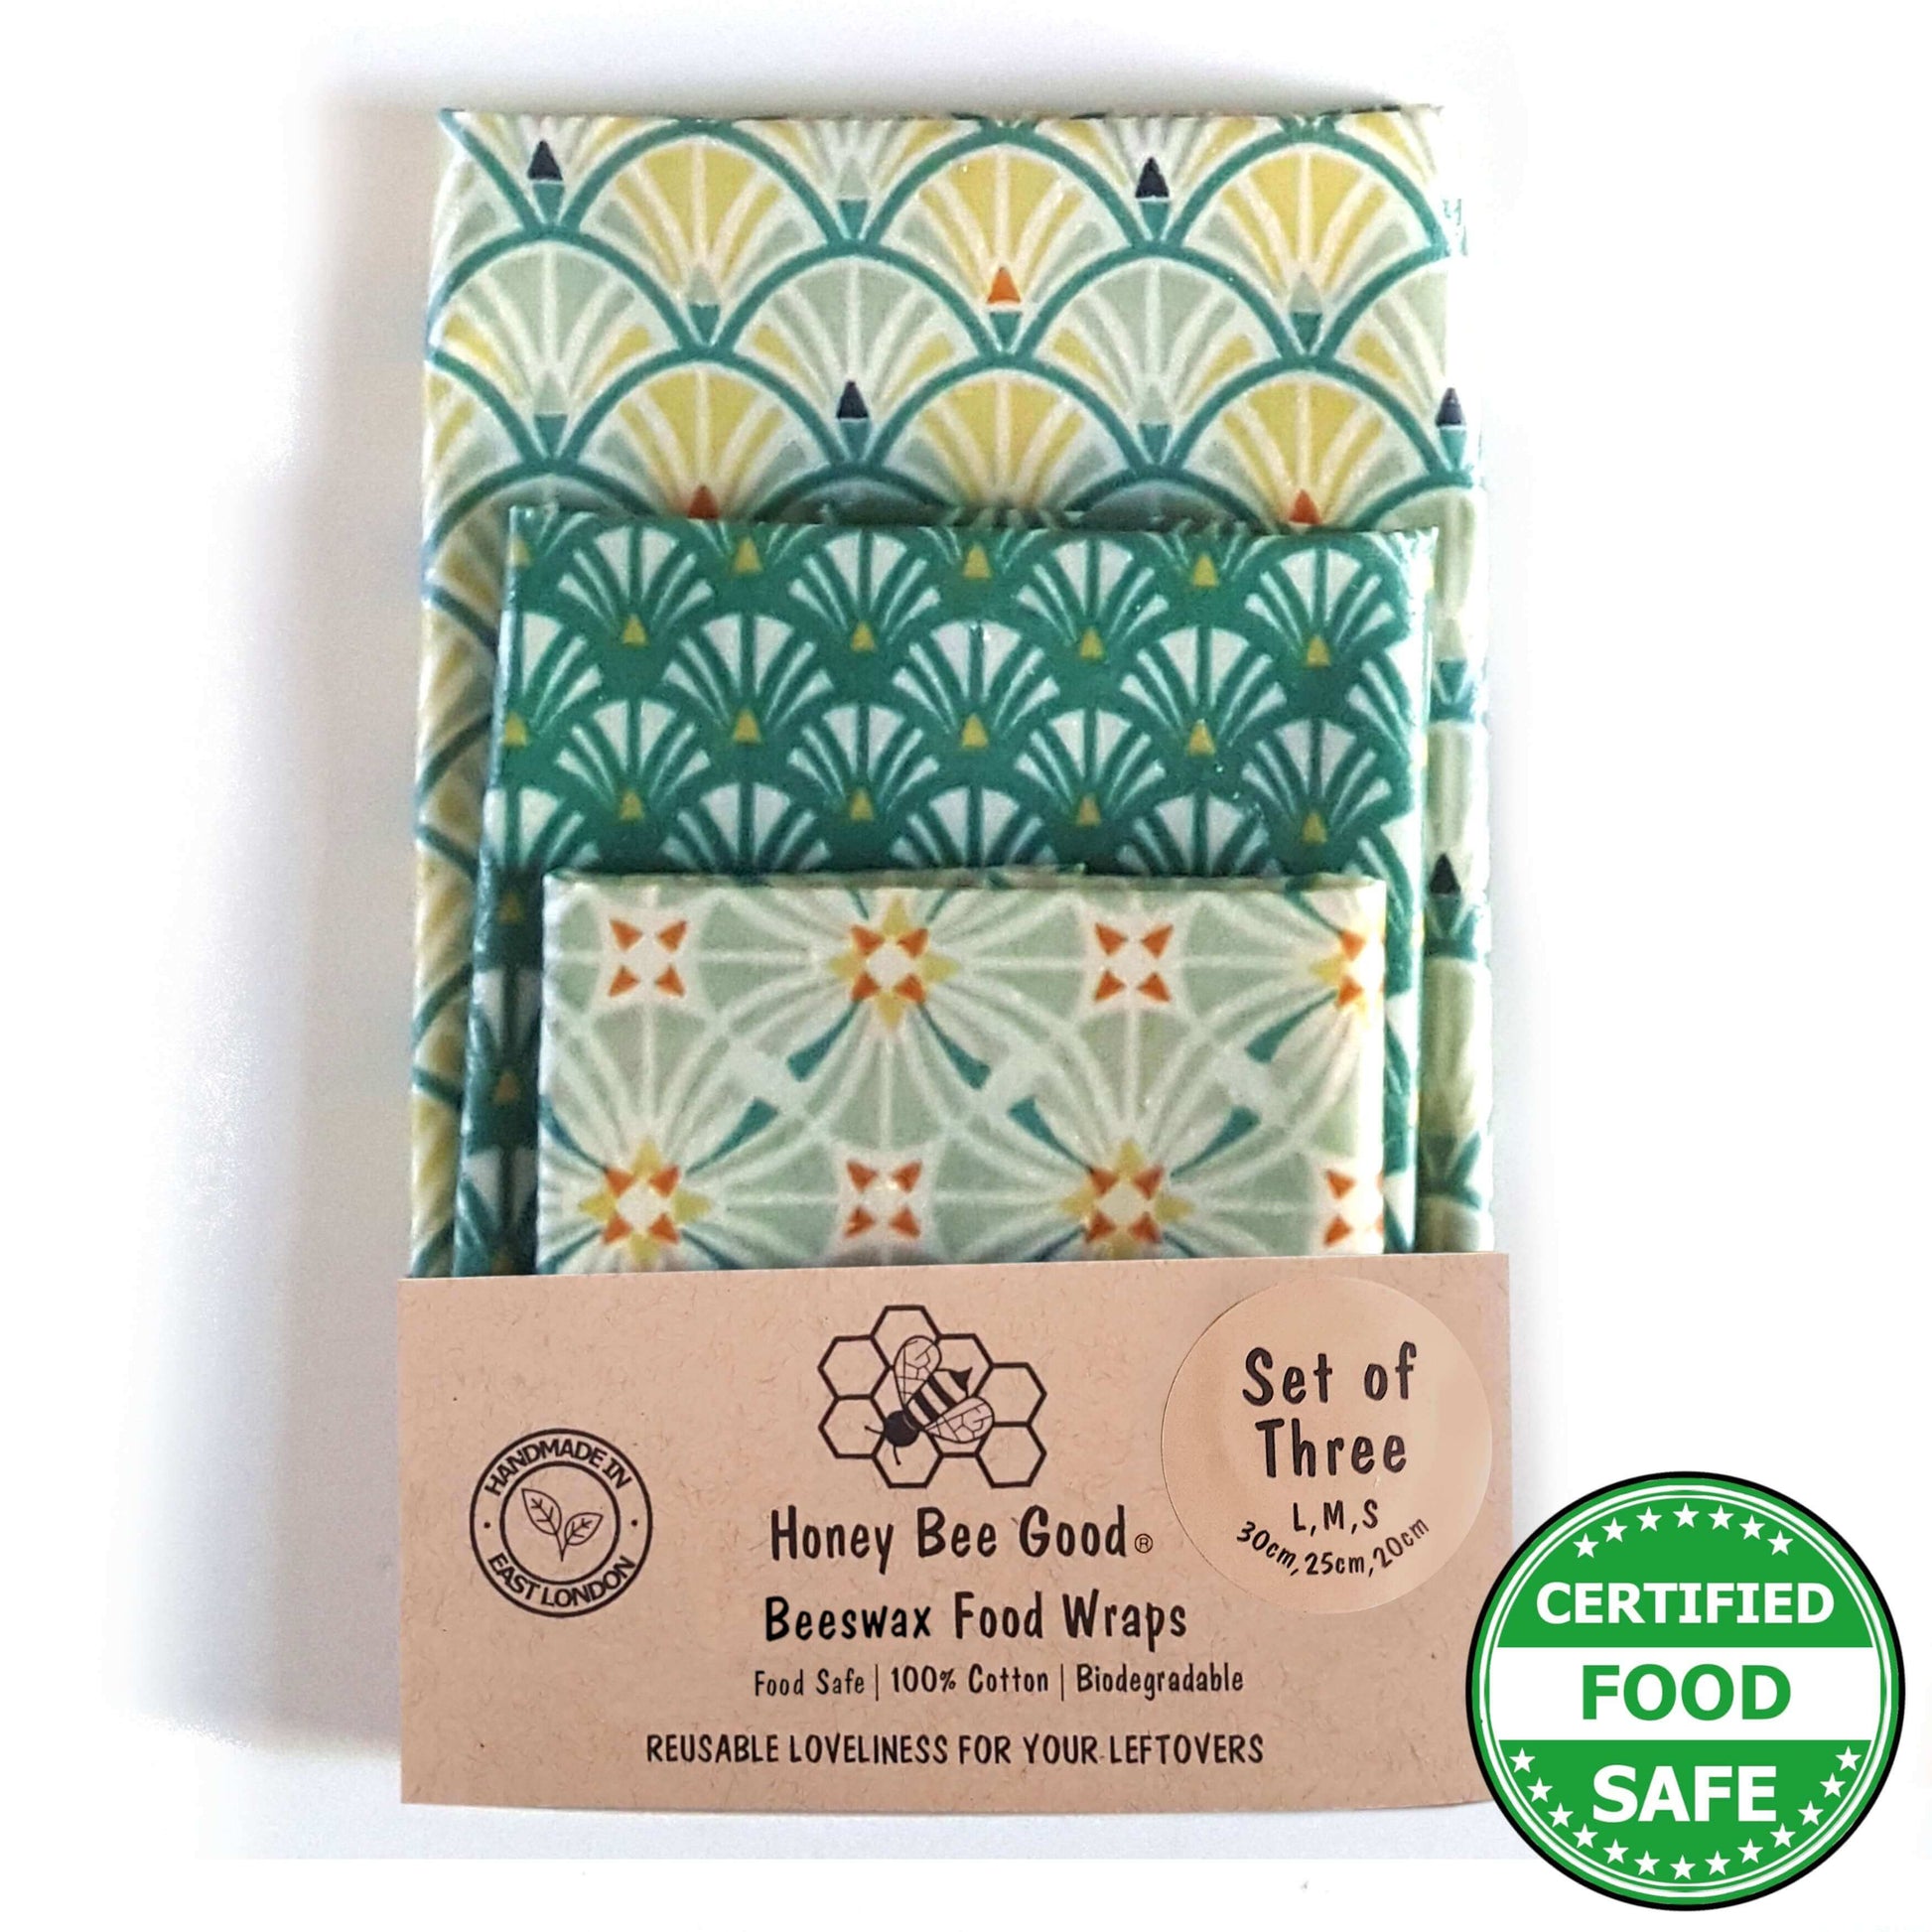 Reusable Beeswax Food Wraps 100% Hand Made in the UK by Honey Bee Good shown in Set of 3 Heritage Green pattern